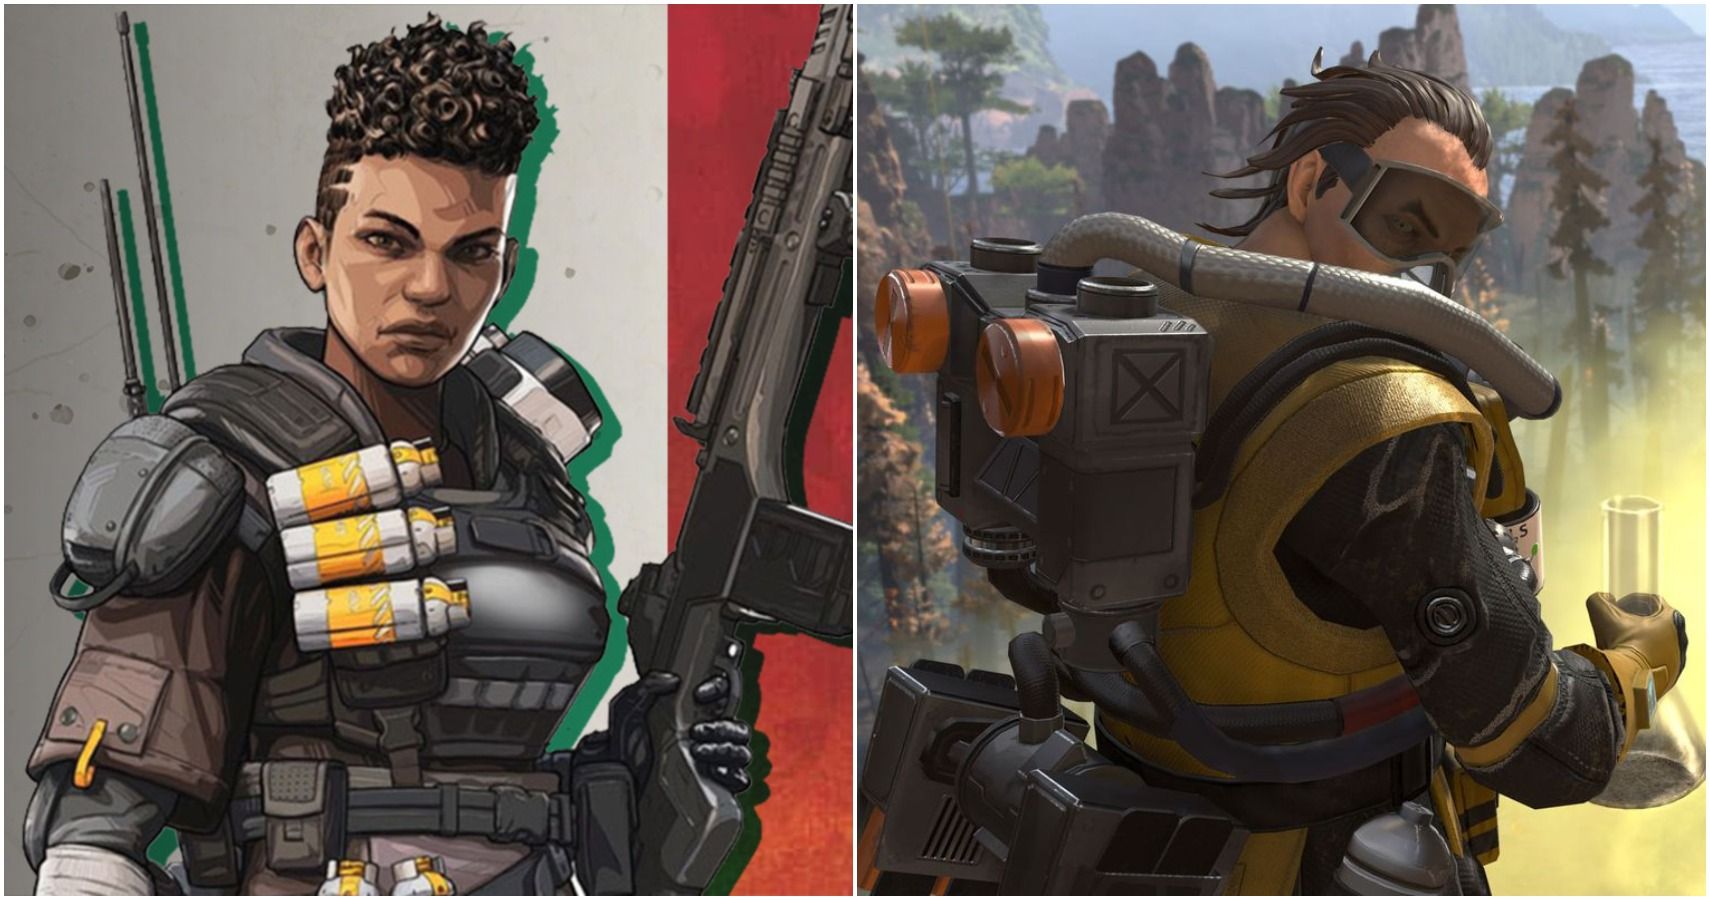 Next Apex Legends Heirlooms Will Be For Caustic And Bangalore, According to Data Miners